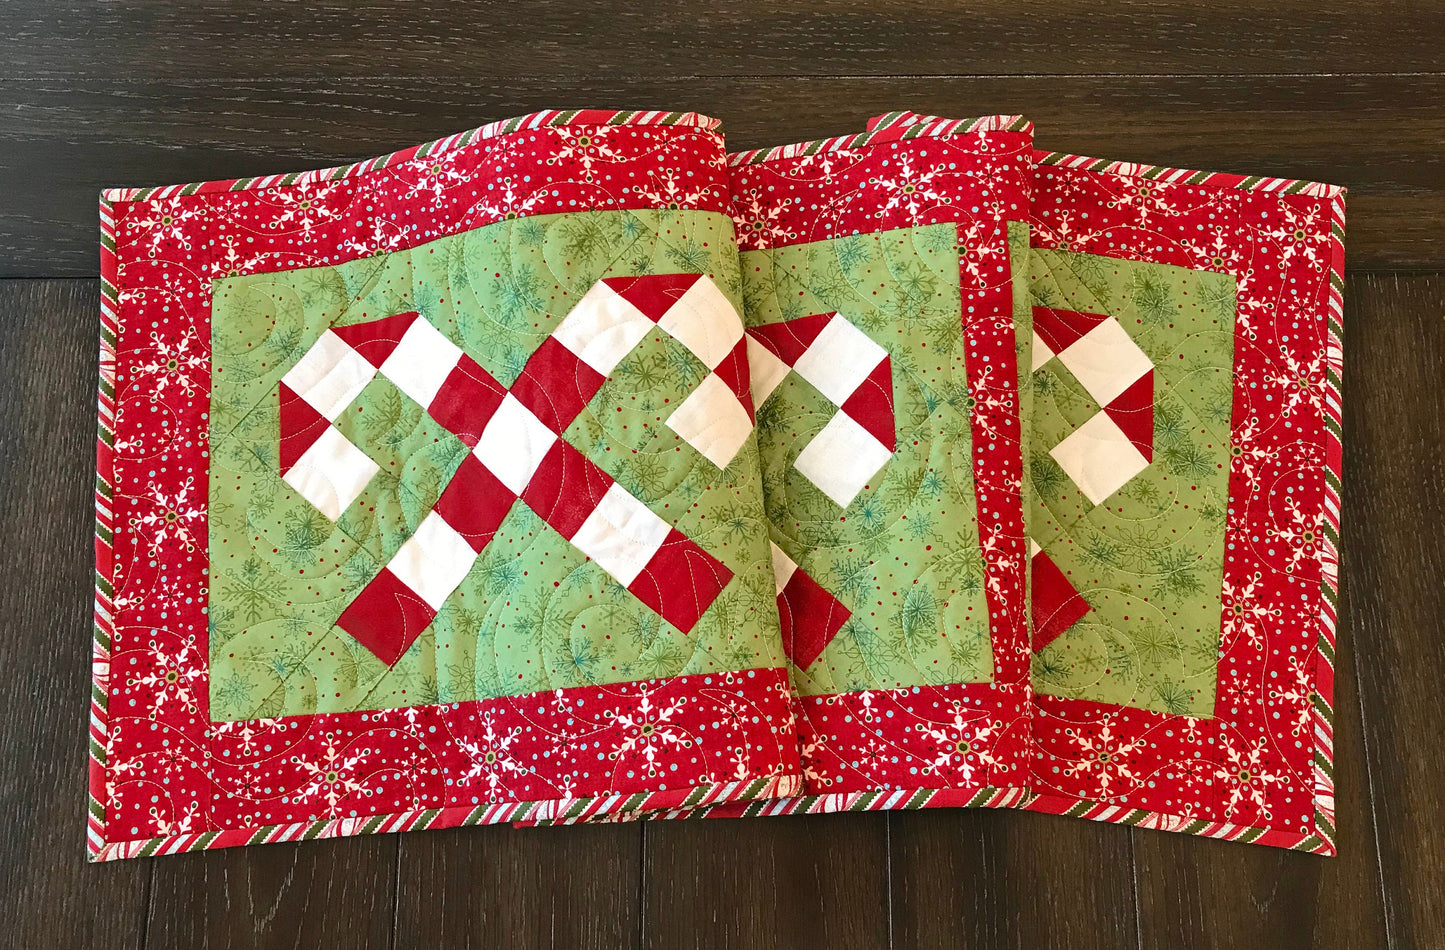 Digital pattern for a quilted Christmas table runner that has candy canes in three sections surrounded by a border.